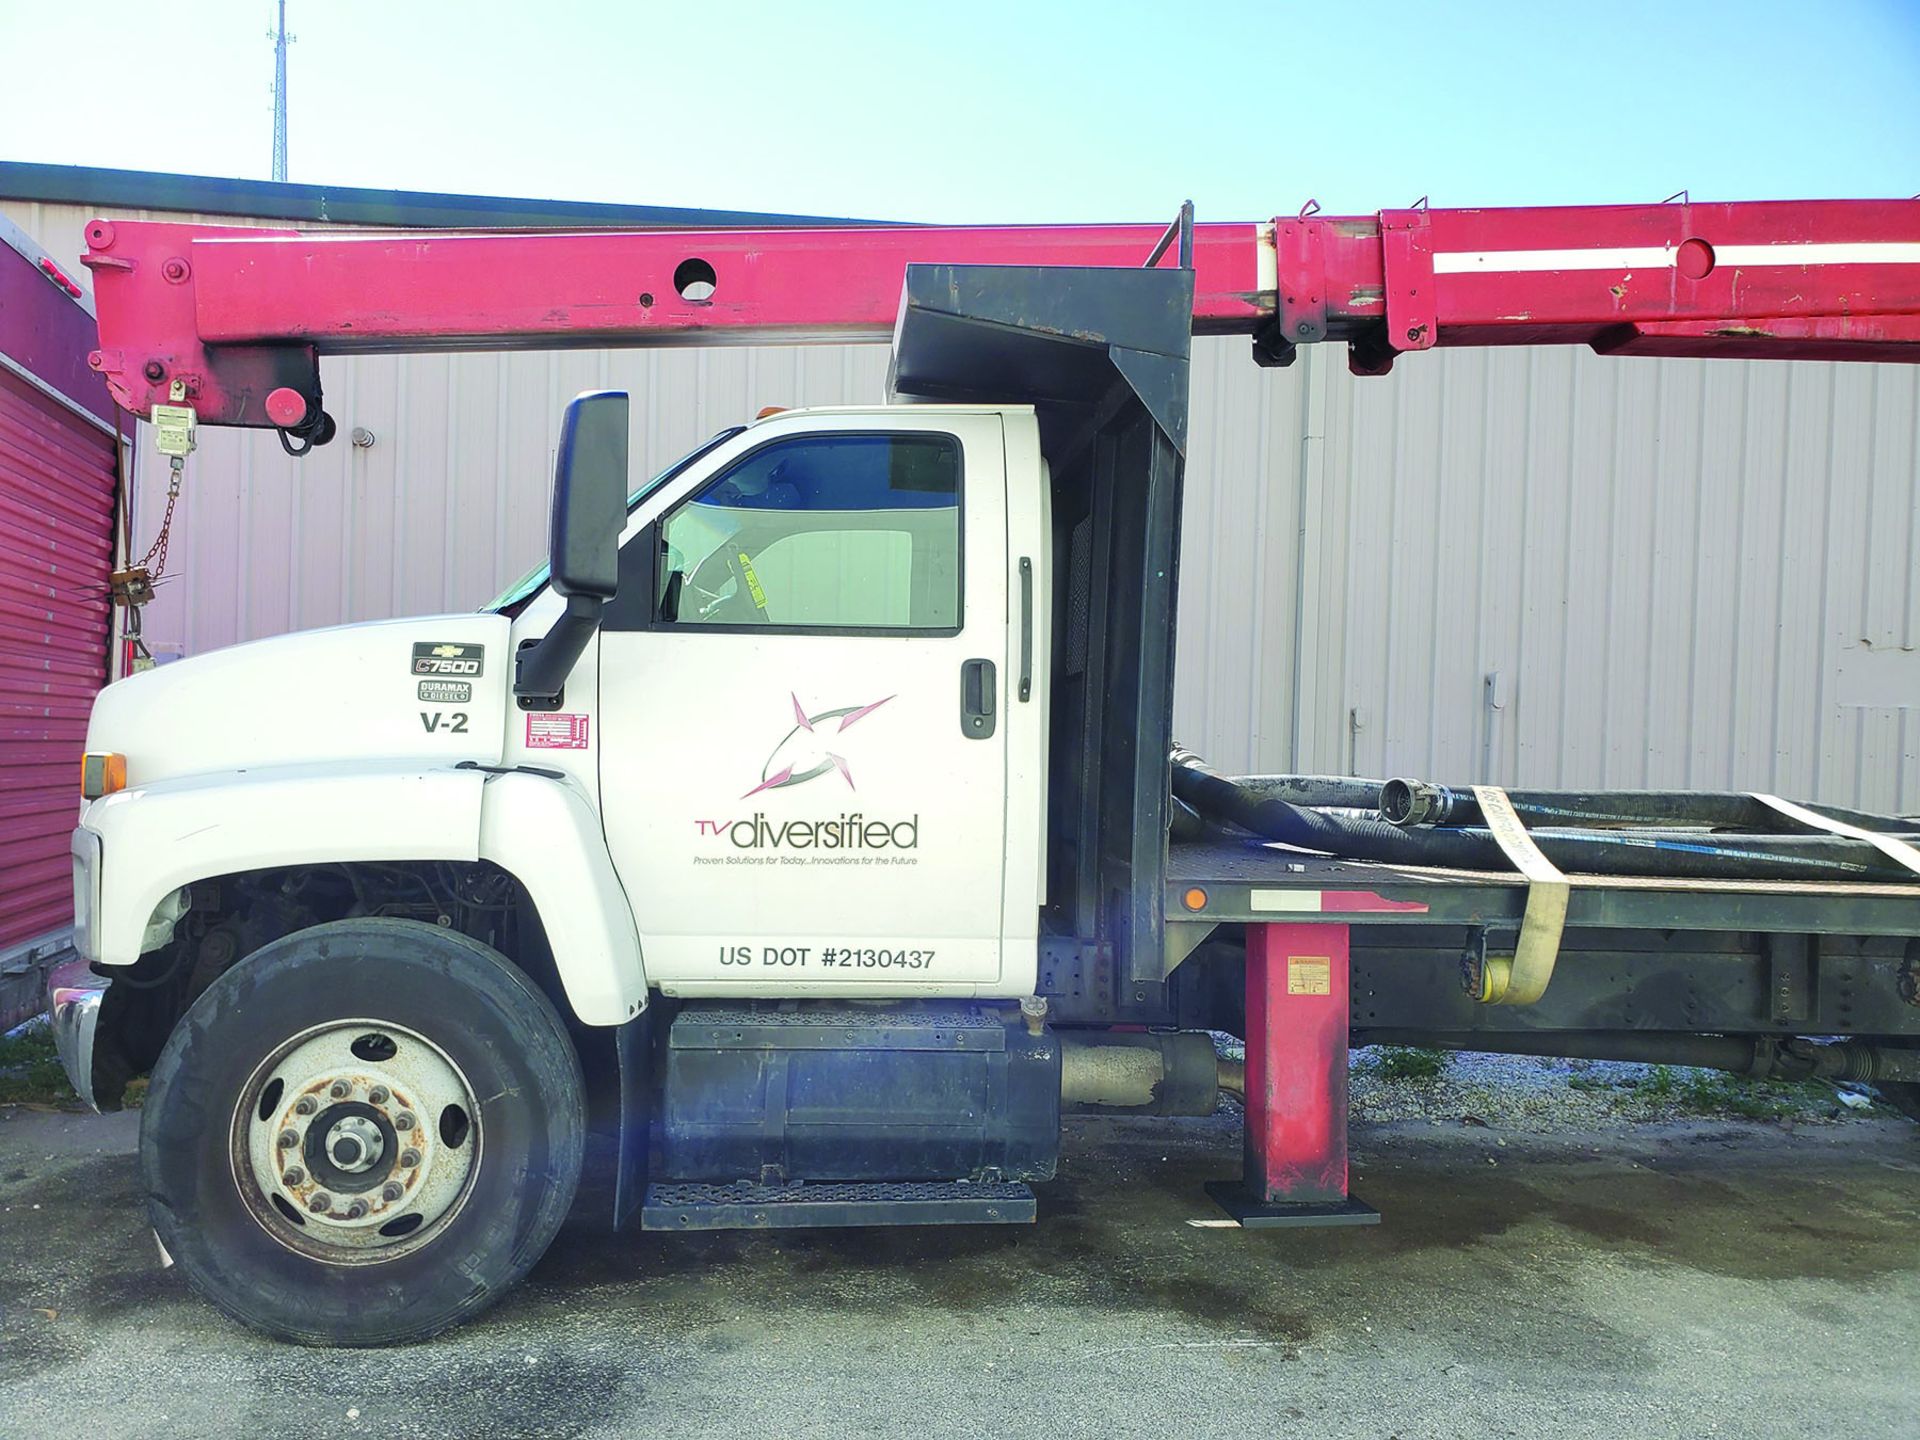 CHEVROLET C7500 S/A FLAT BED WITH 36' TELESCOPING BOOM CRANE, MODEL RO STNGERTC120, 3-STAGE BOOM, - Image 7 of 13